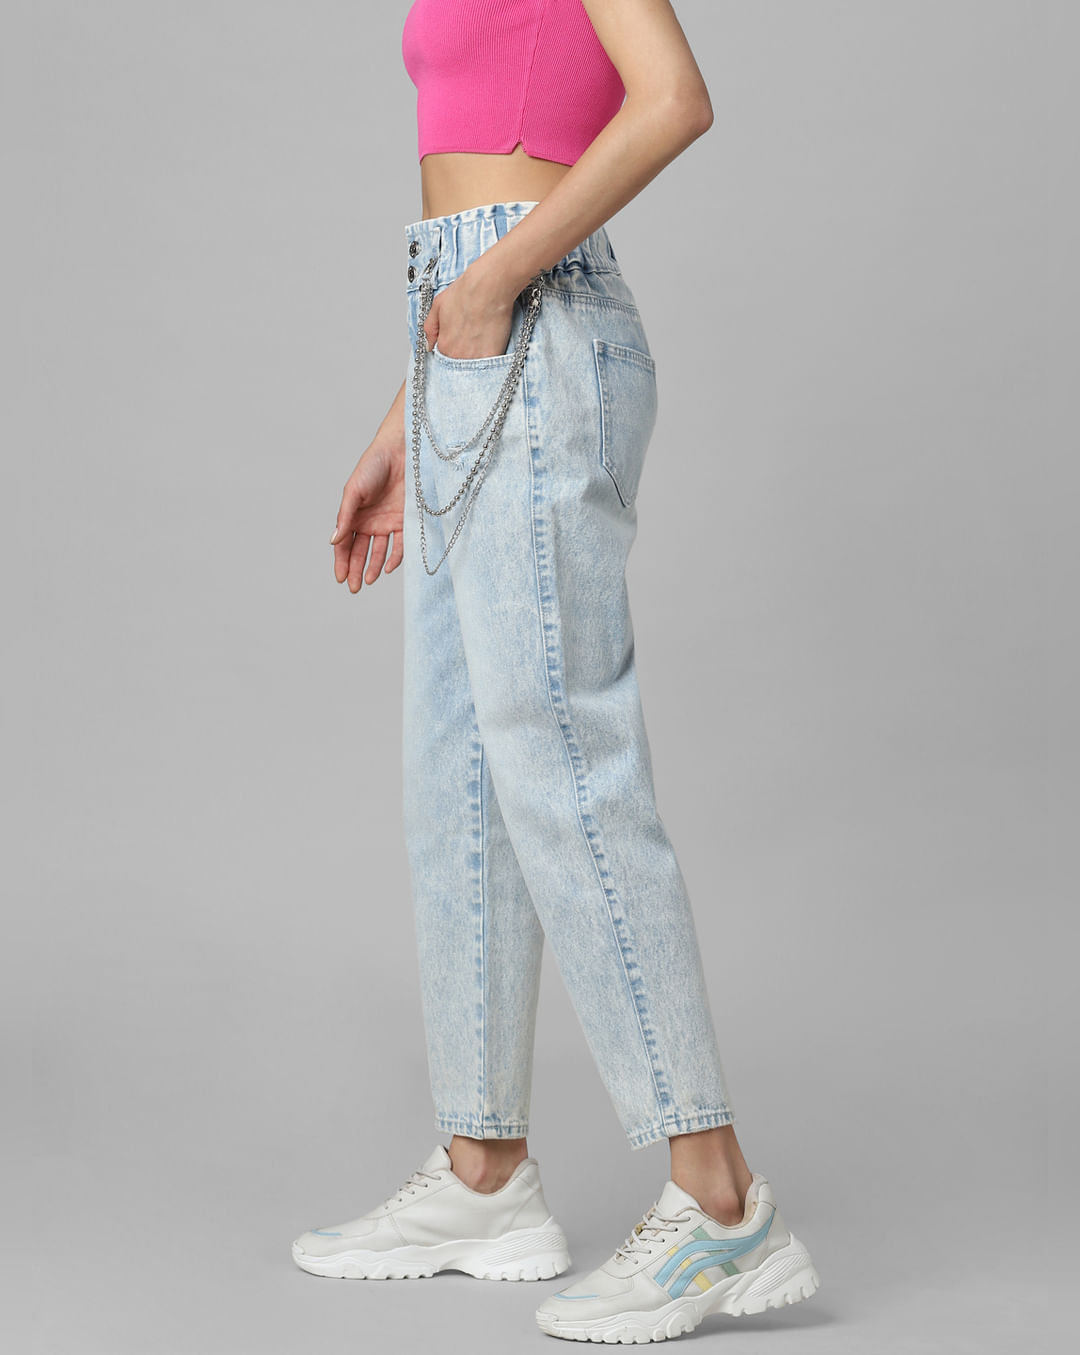 Grey Mid Rise Carrot Fit Pants Online Shopping